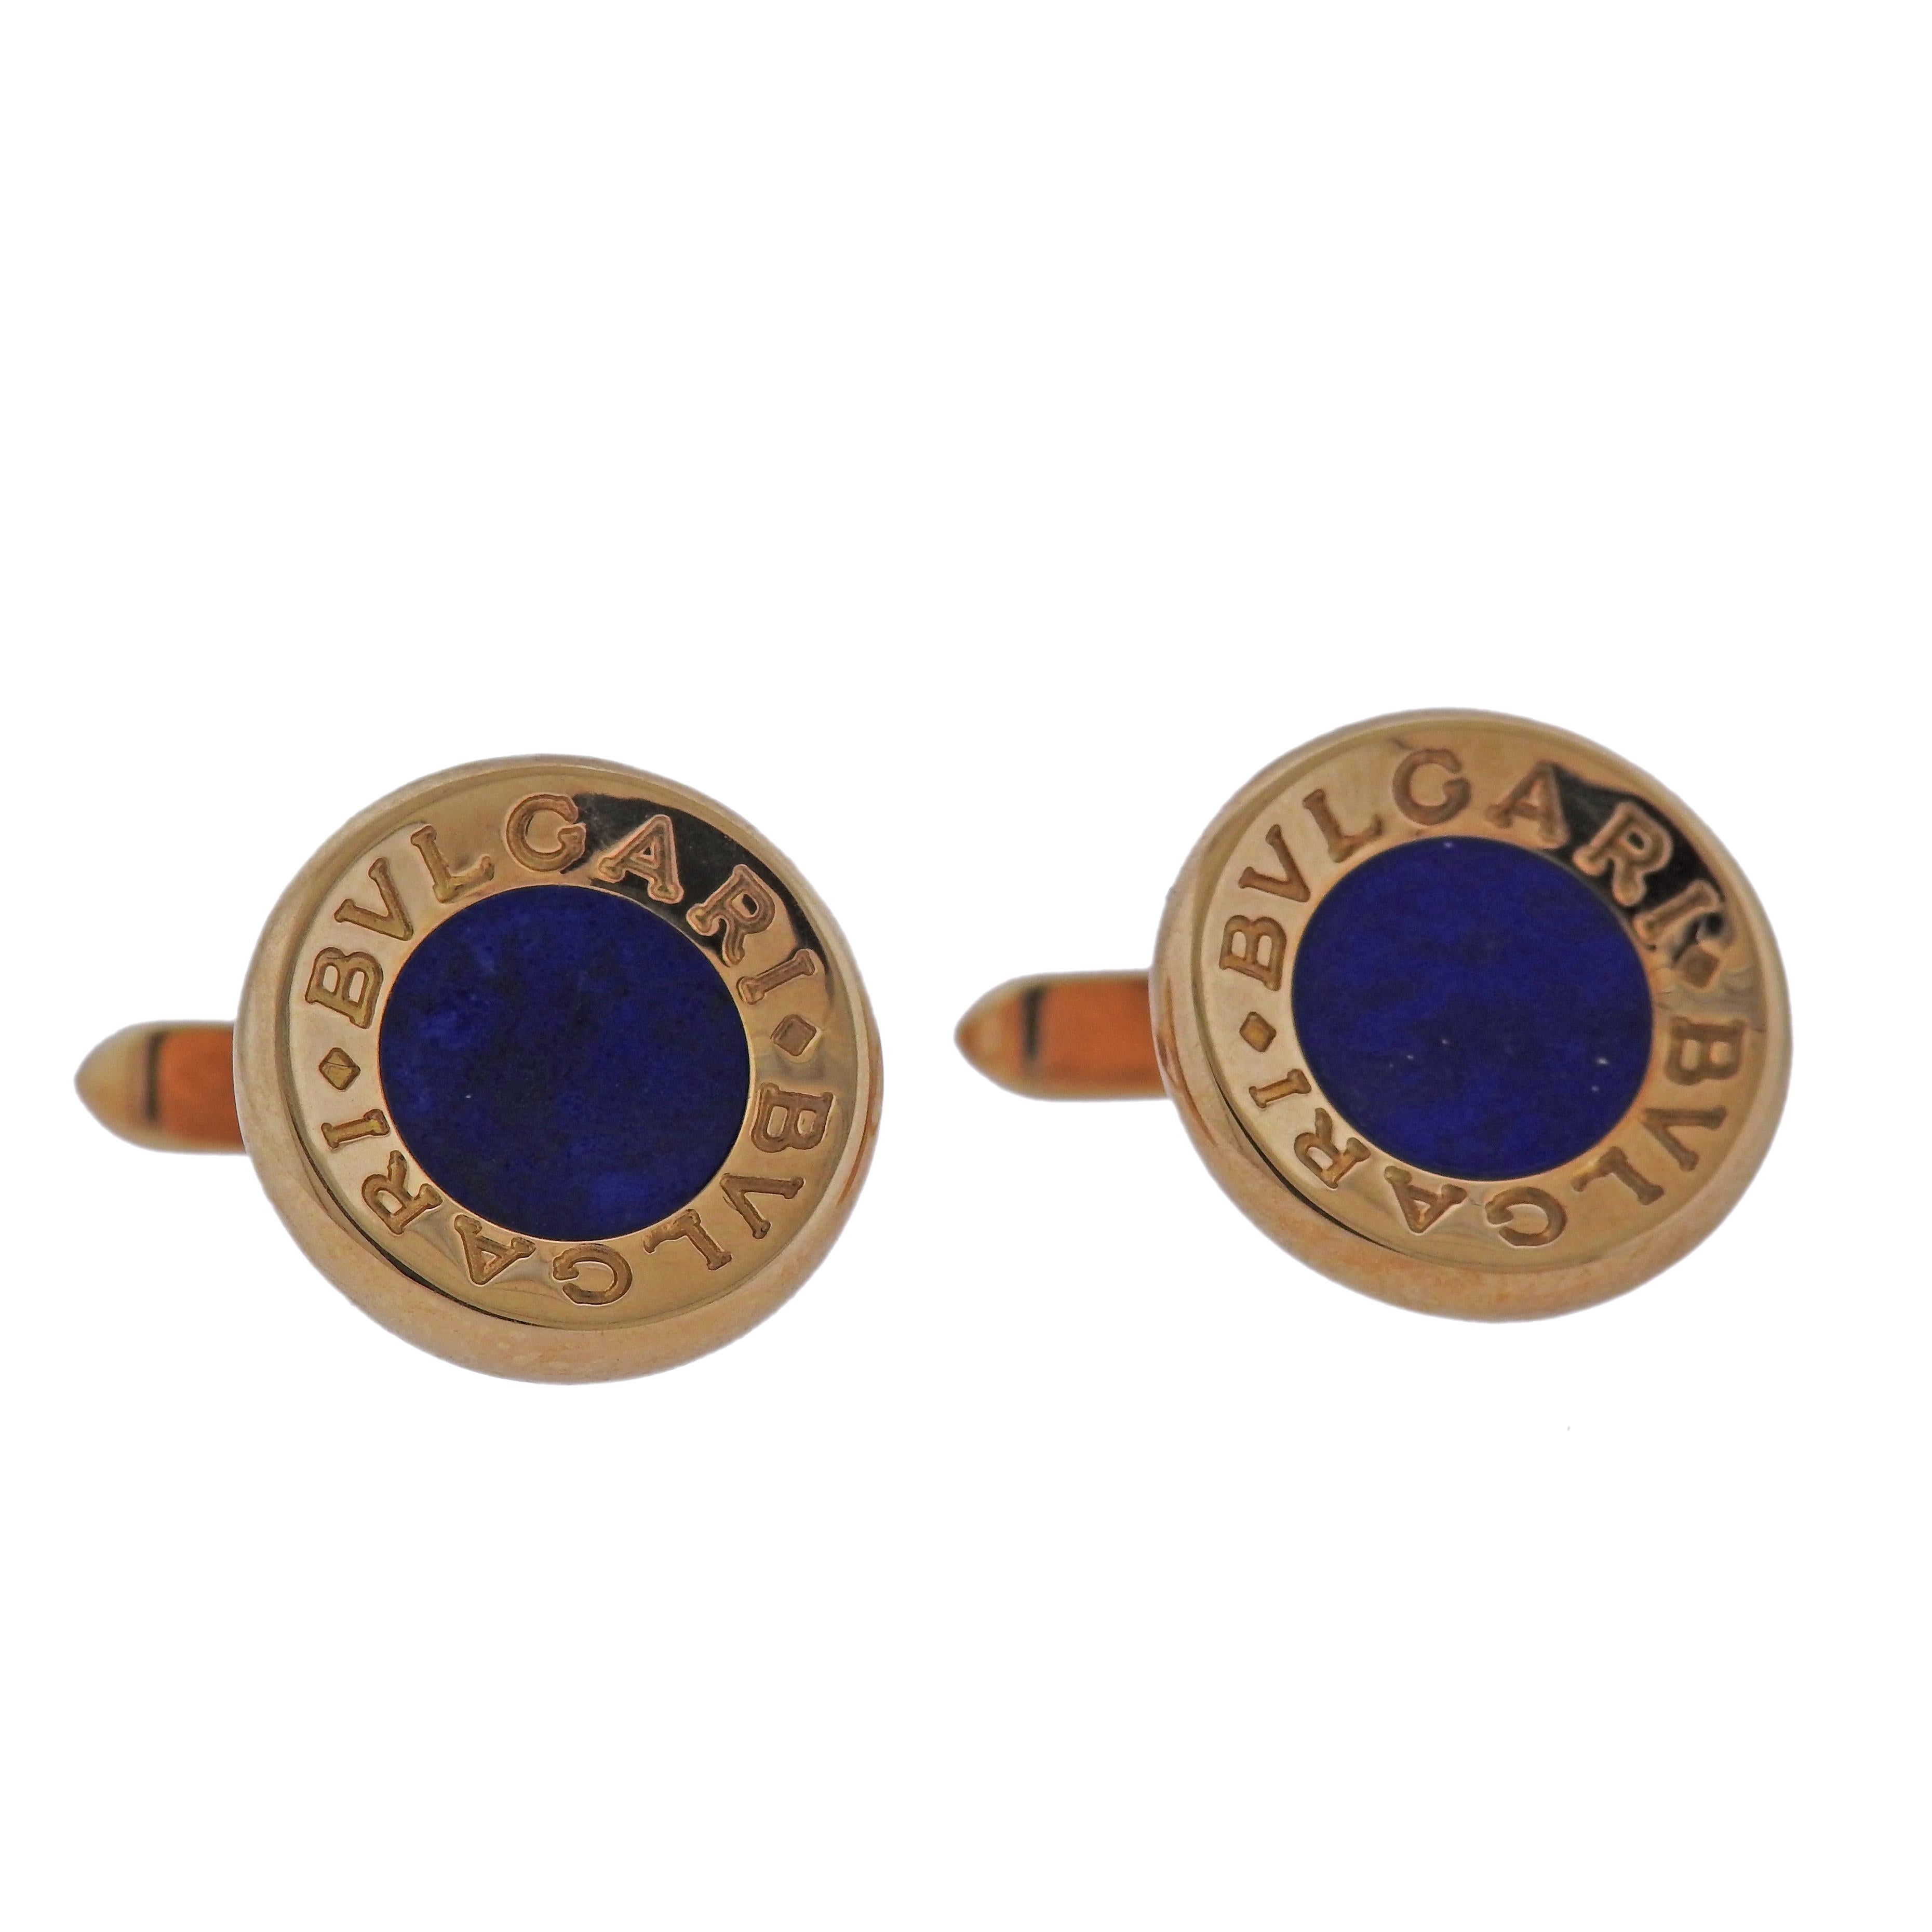 Pair of 18k yellow gold cufflinks by Bvlgari, set with 9mm lapis lazuli. Cufflink is 16mm in diameter. Weigh 19.1 grams. Marked: Bvlgari, 750, made in Italy.